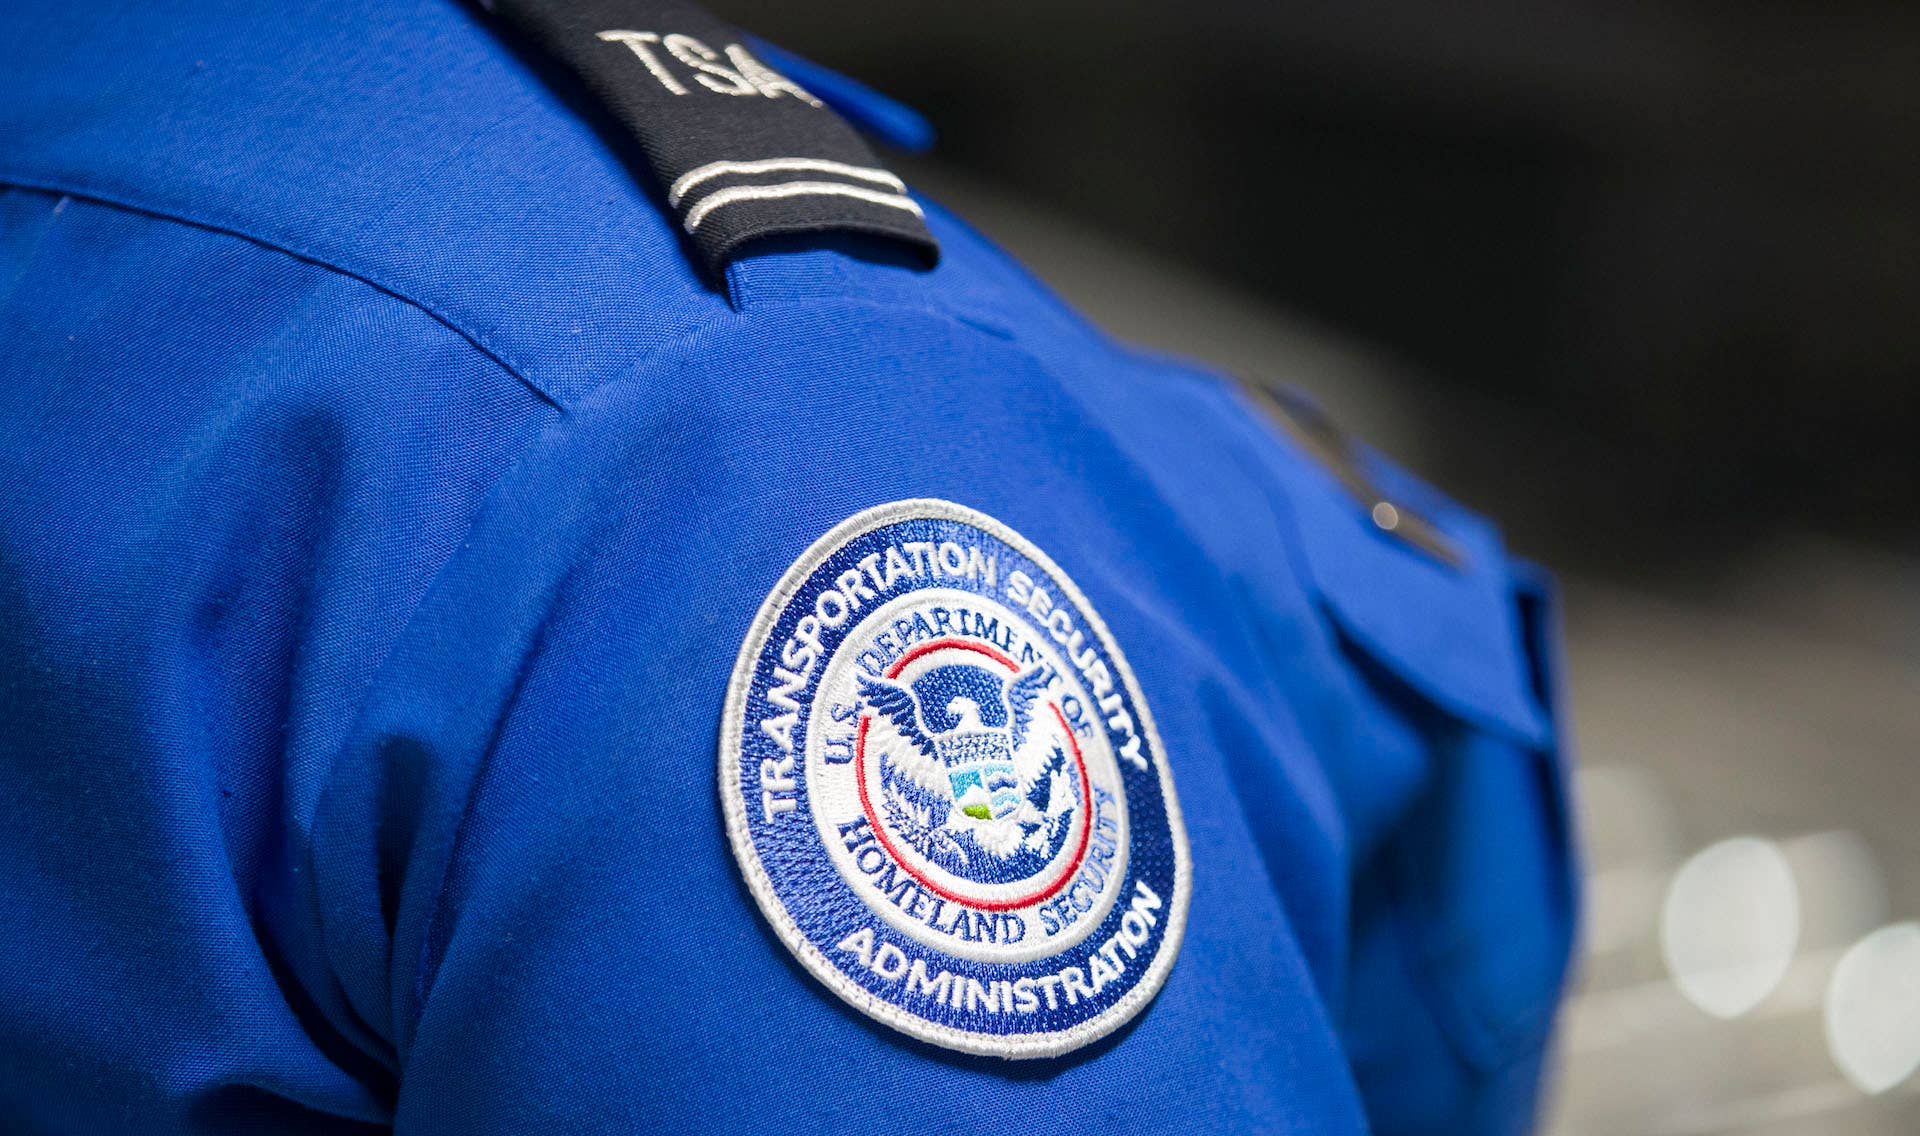 Transportation Security Administration (TSA) agent's patch via Getty Images